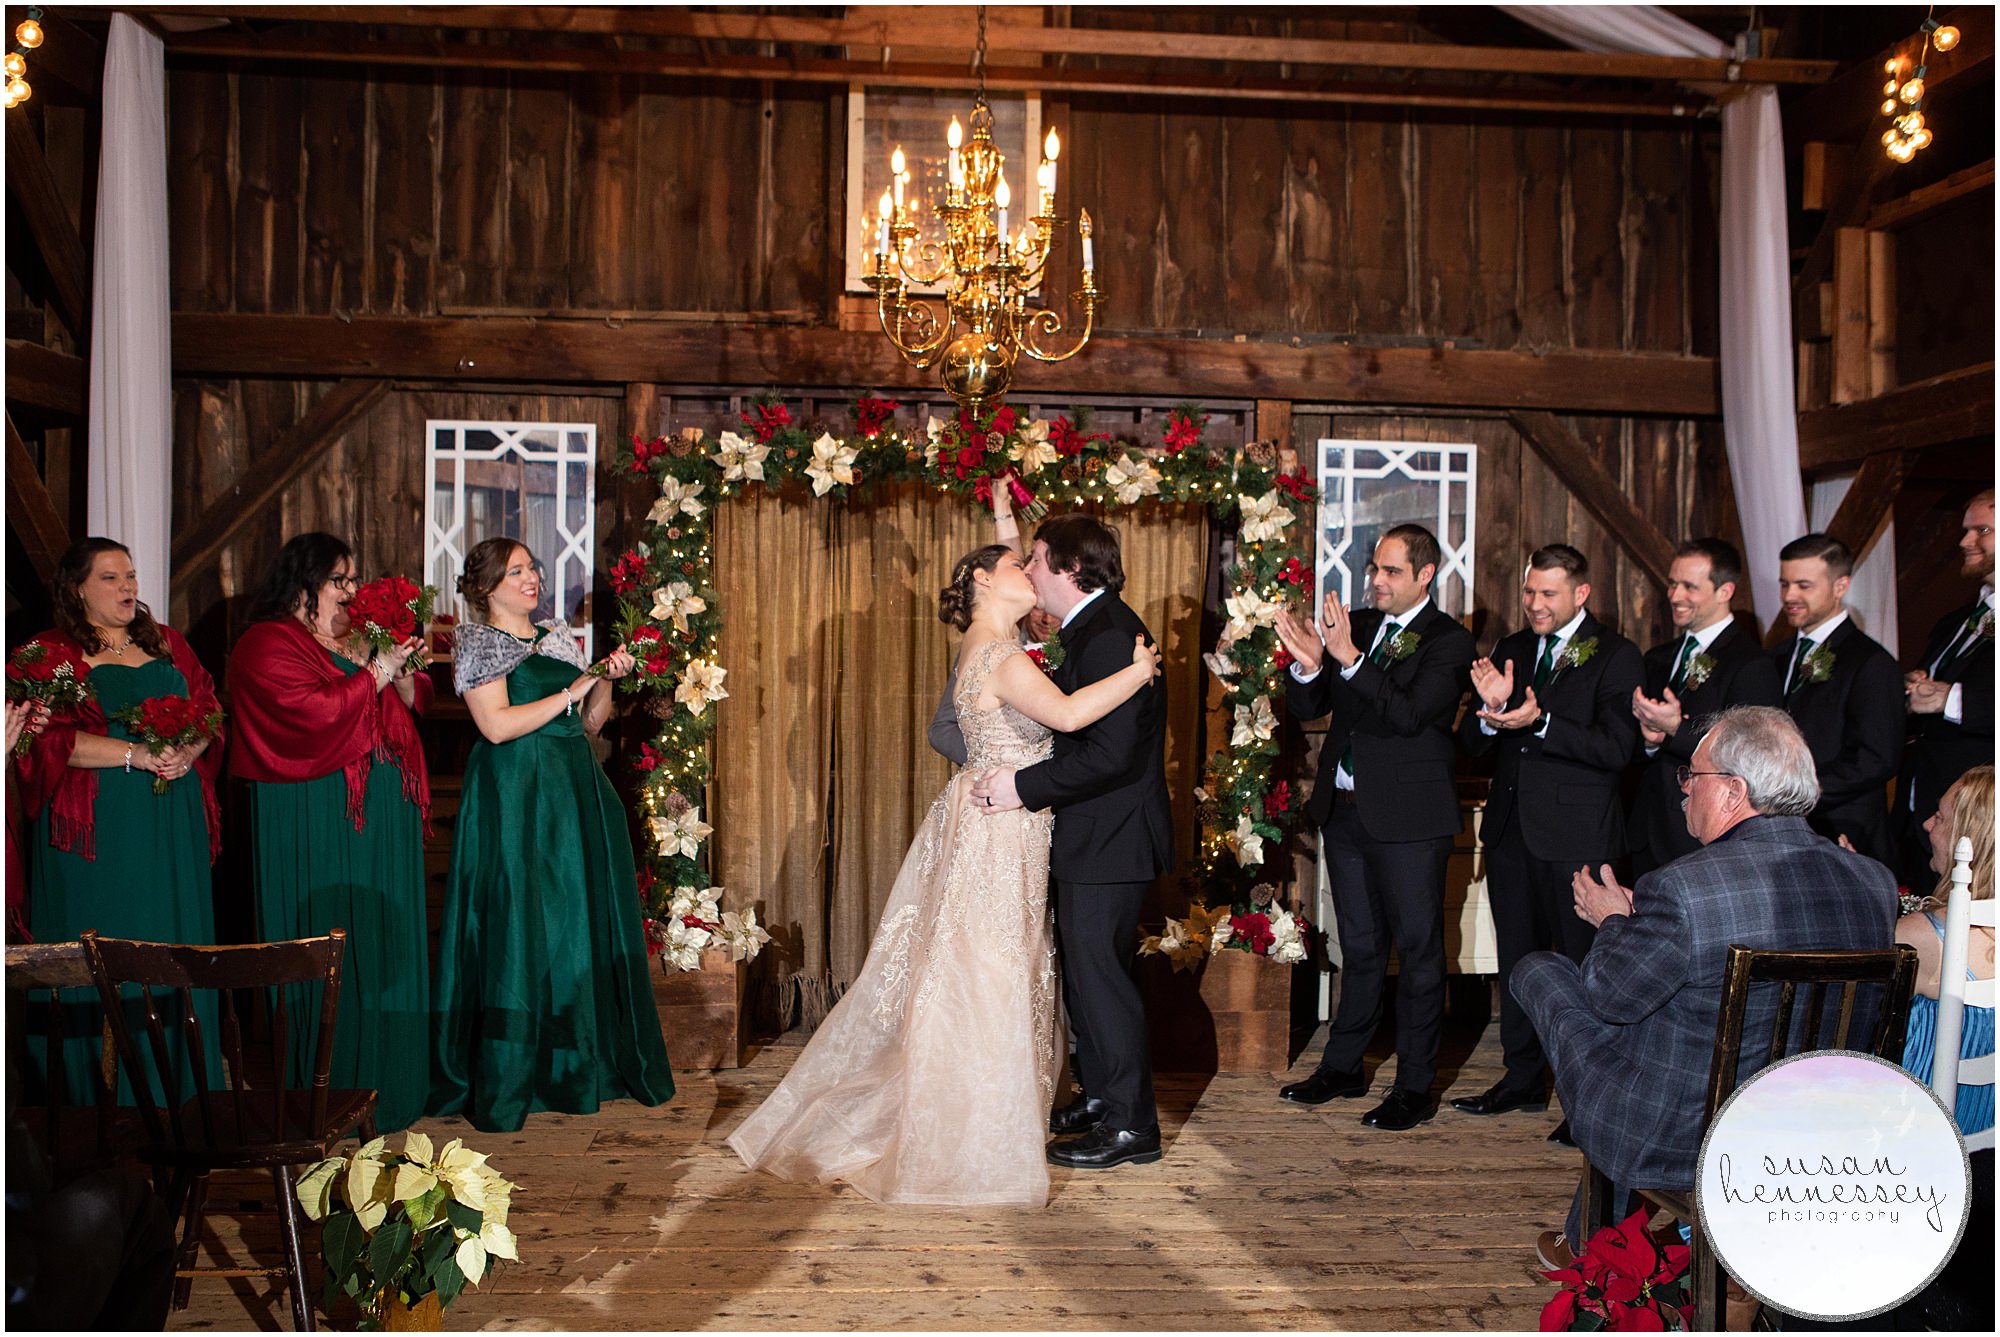 Indoor ceremony at the Loft at Jack's Barn in Oxford, NJ